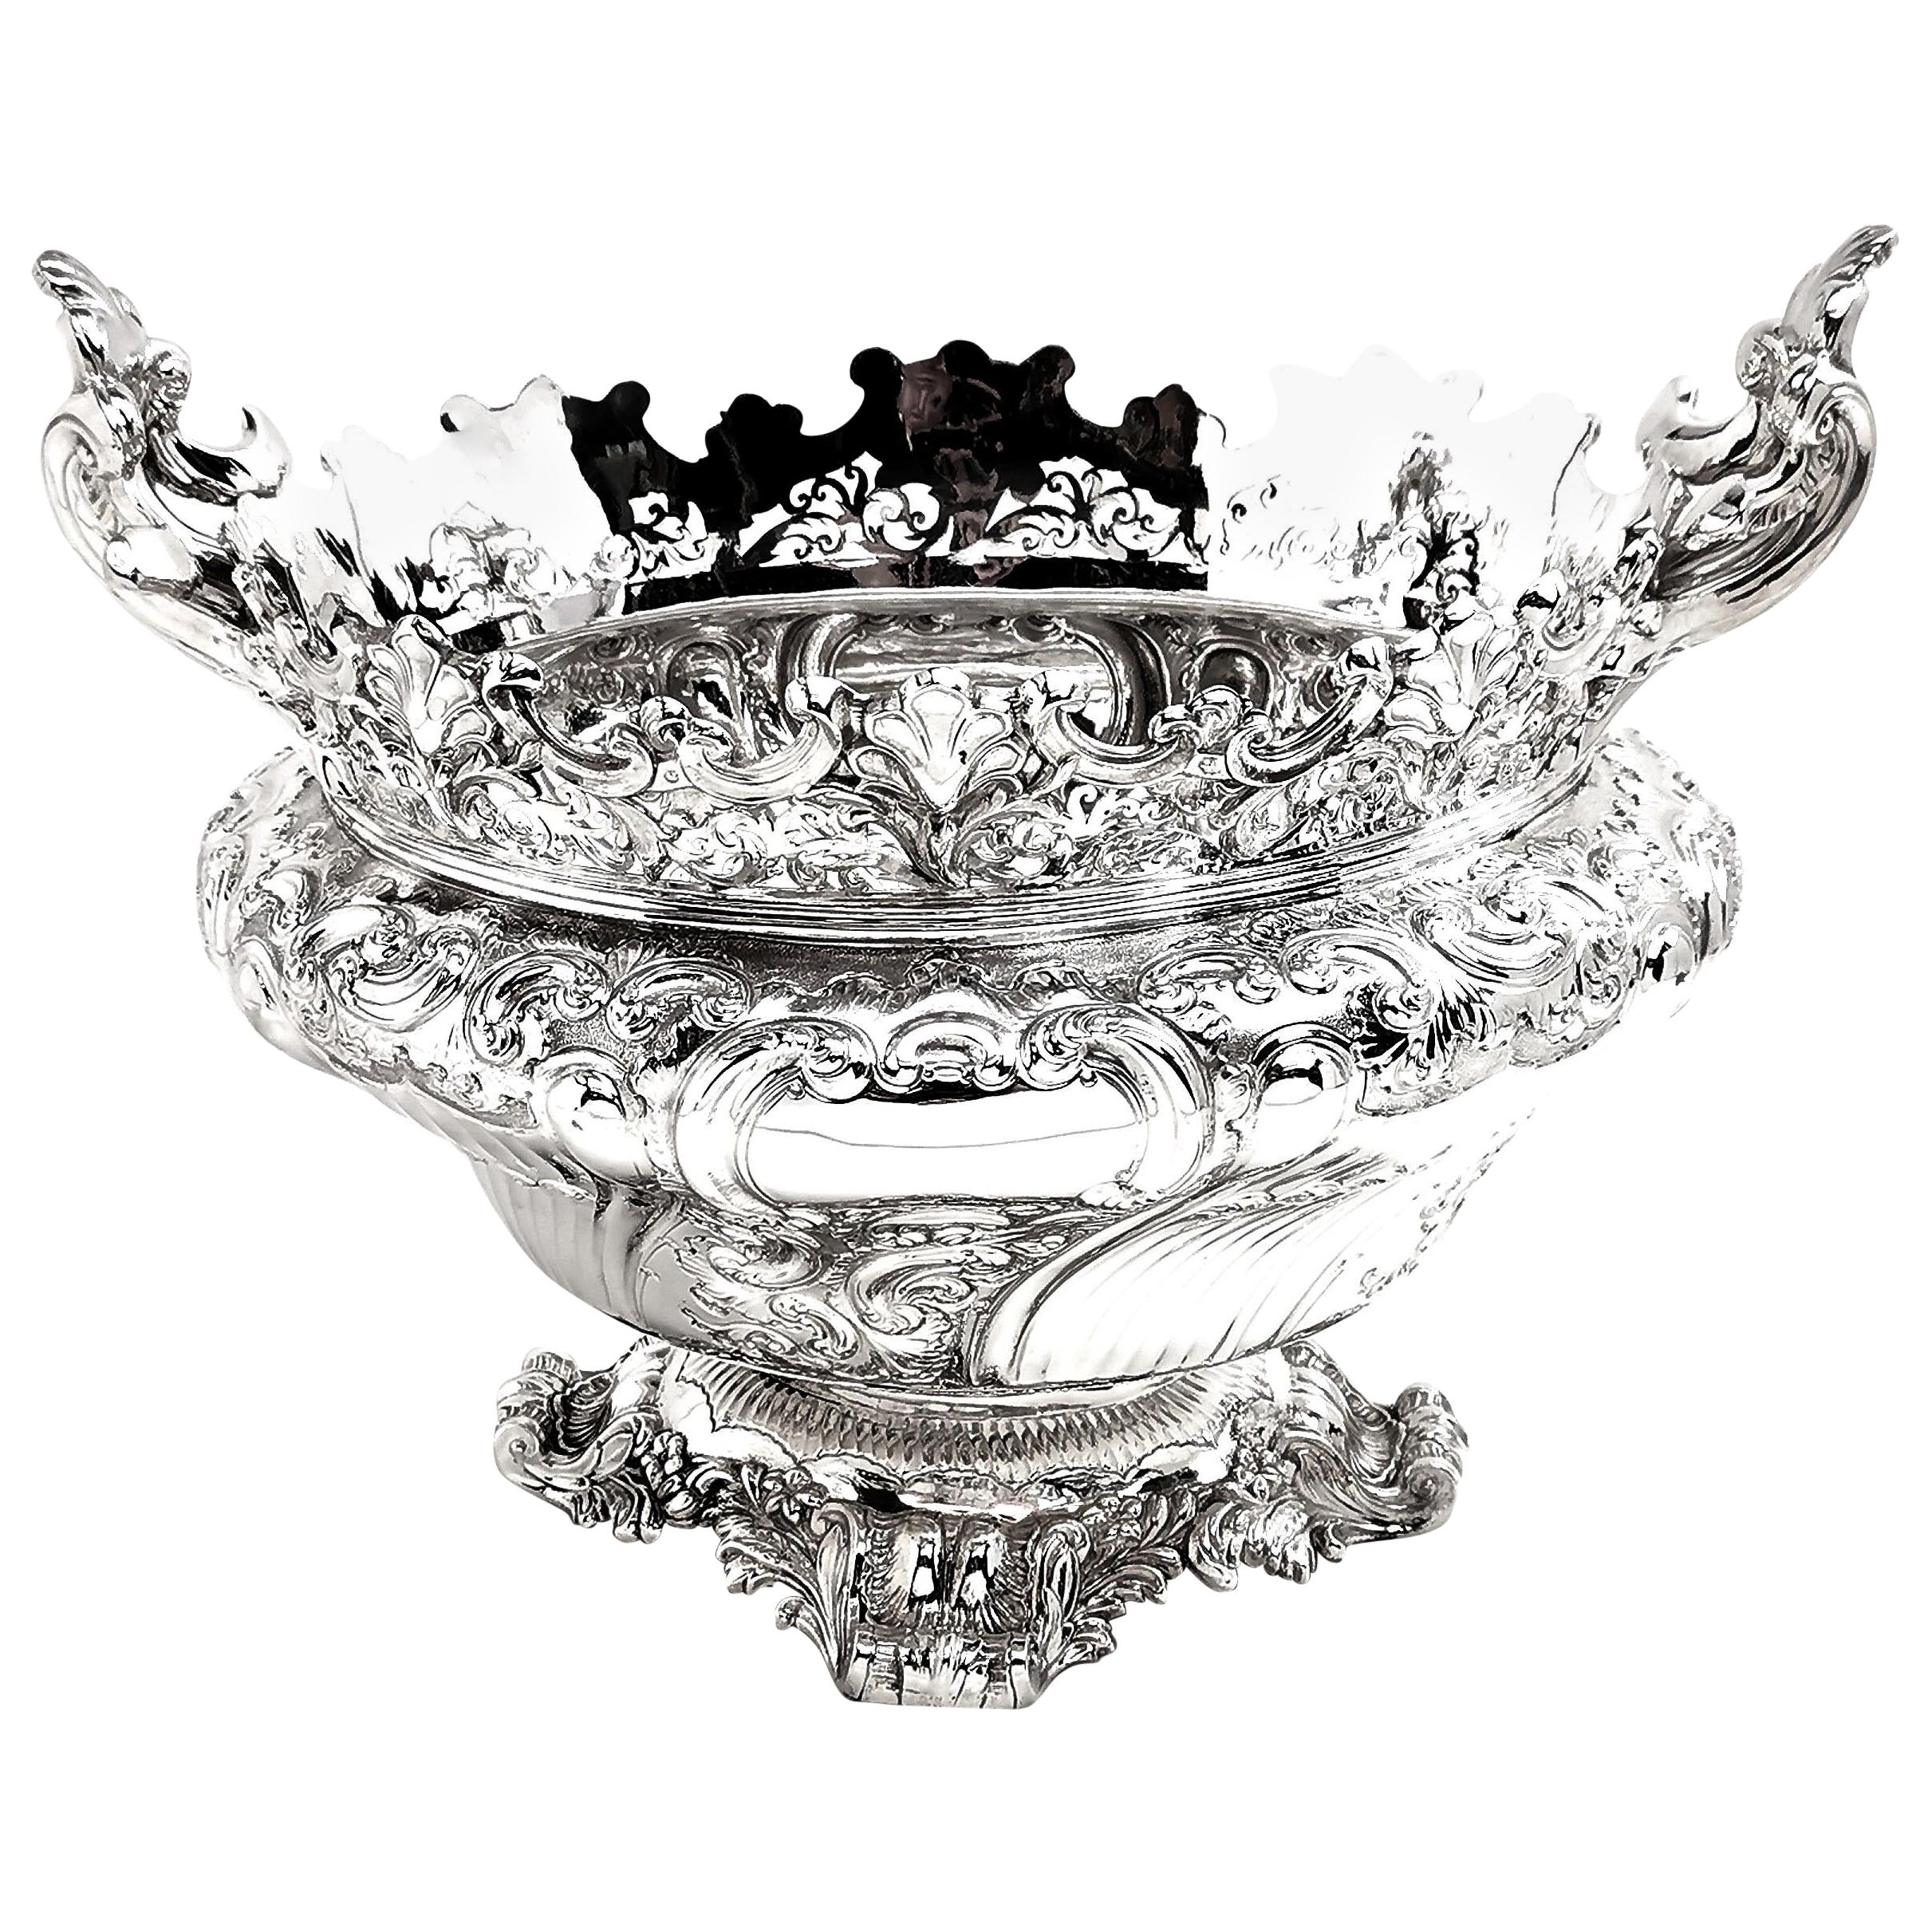 Antique Victorian Sterling Silver Bowl / Dish / Centrepiece, 1899